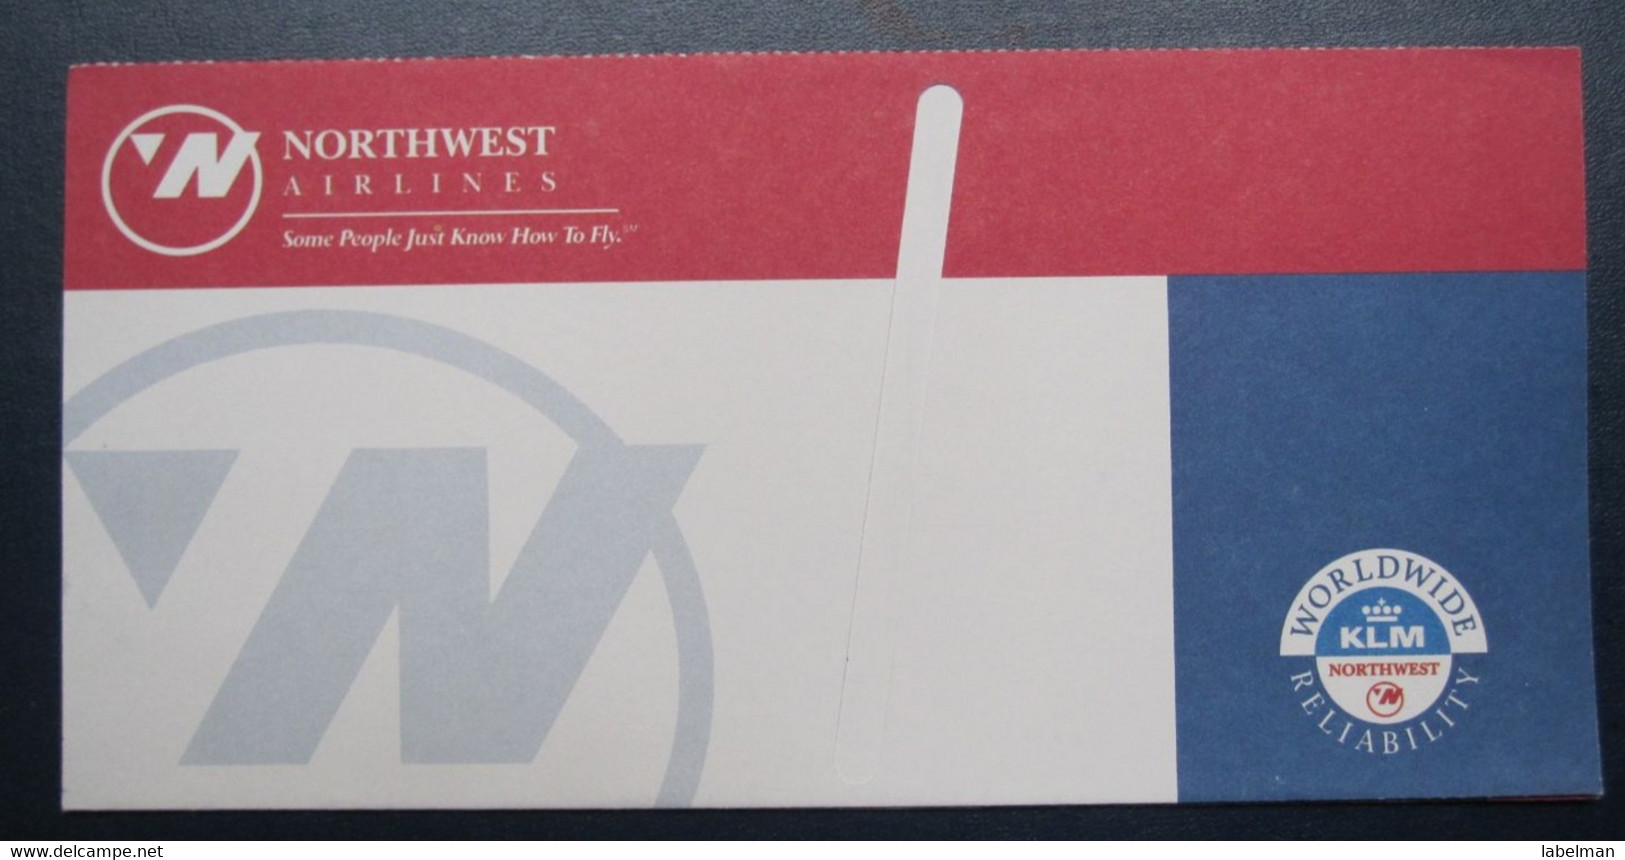 NORTHWEST KLM USA UNITED AVIATION AIRWAYS AIRLINE TICKET HOLDER BOOKLET VIP TAG LUGGAGE BAGGAGE PLANE AIRCRAFT AIRPORT - World